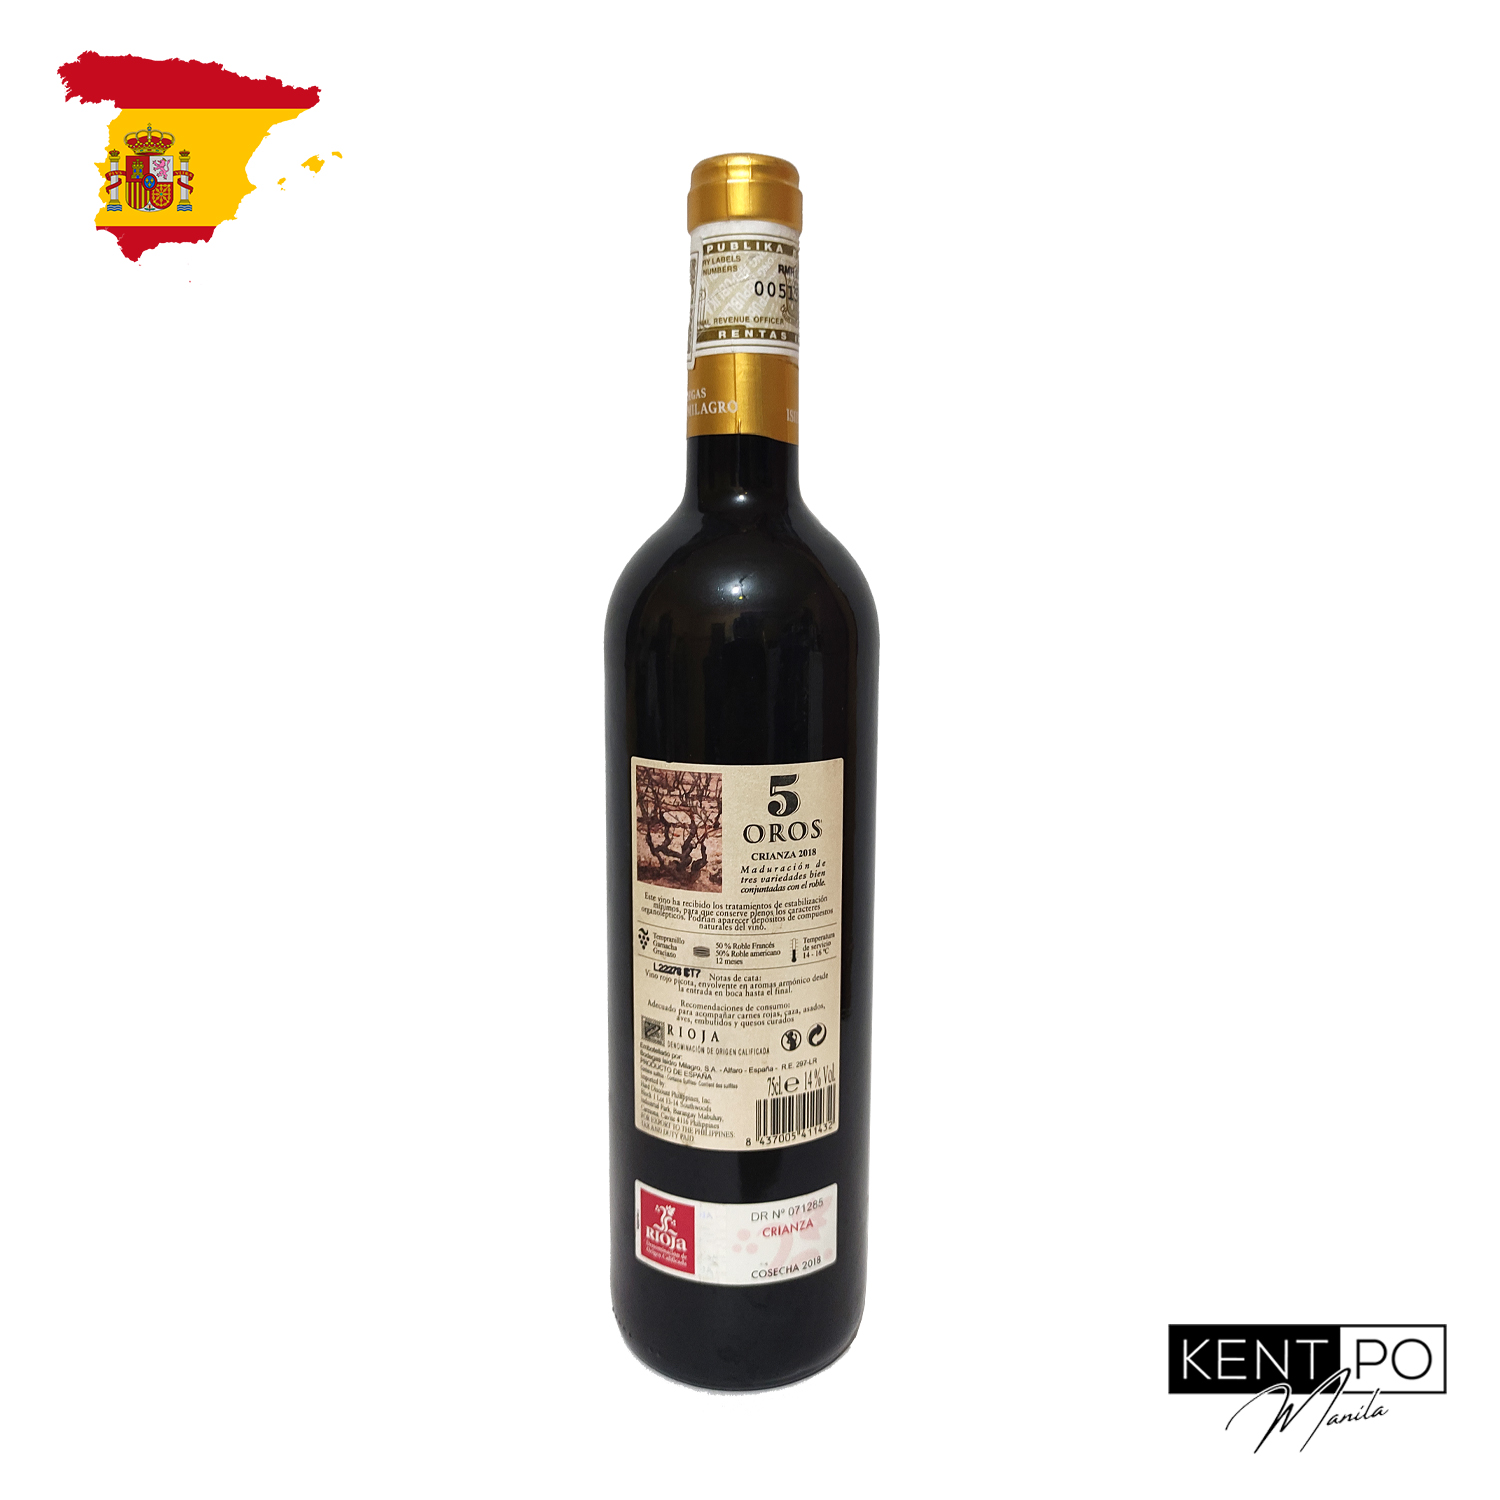 RED WINE IMPORTED 75cl PH CRIANZA MILAGRO OF PRODUCT BODEGAS ISIDRO OROS 5 | 2018 SPAIN Lazada